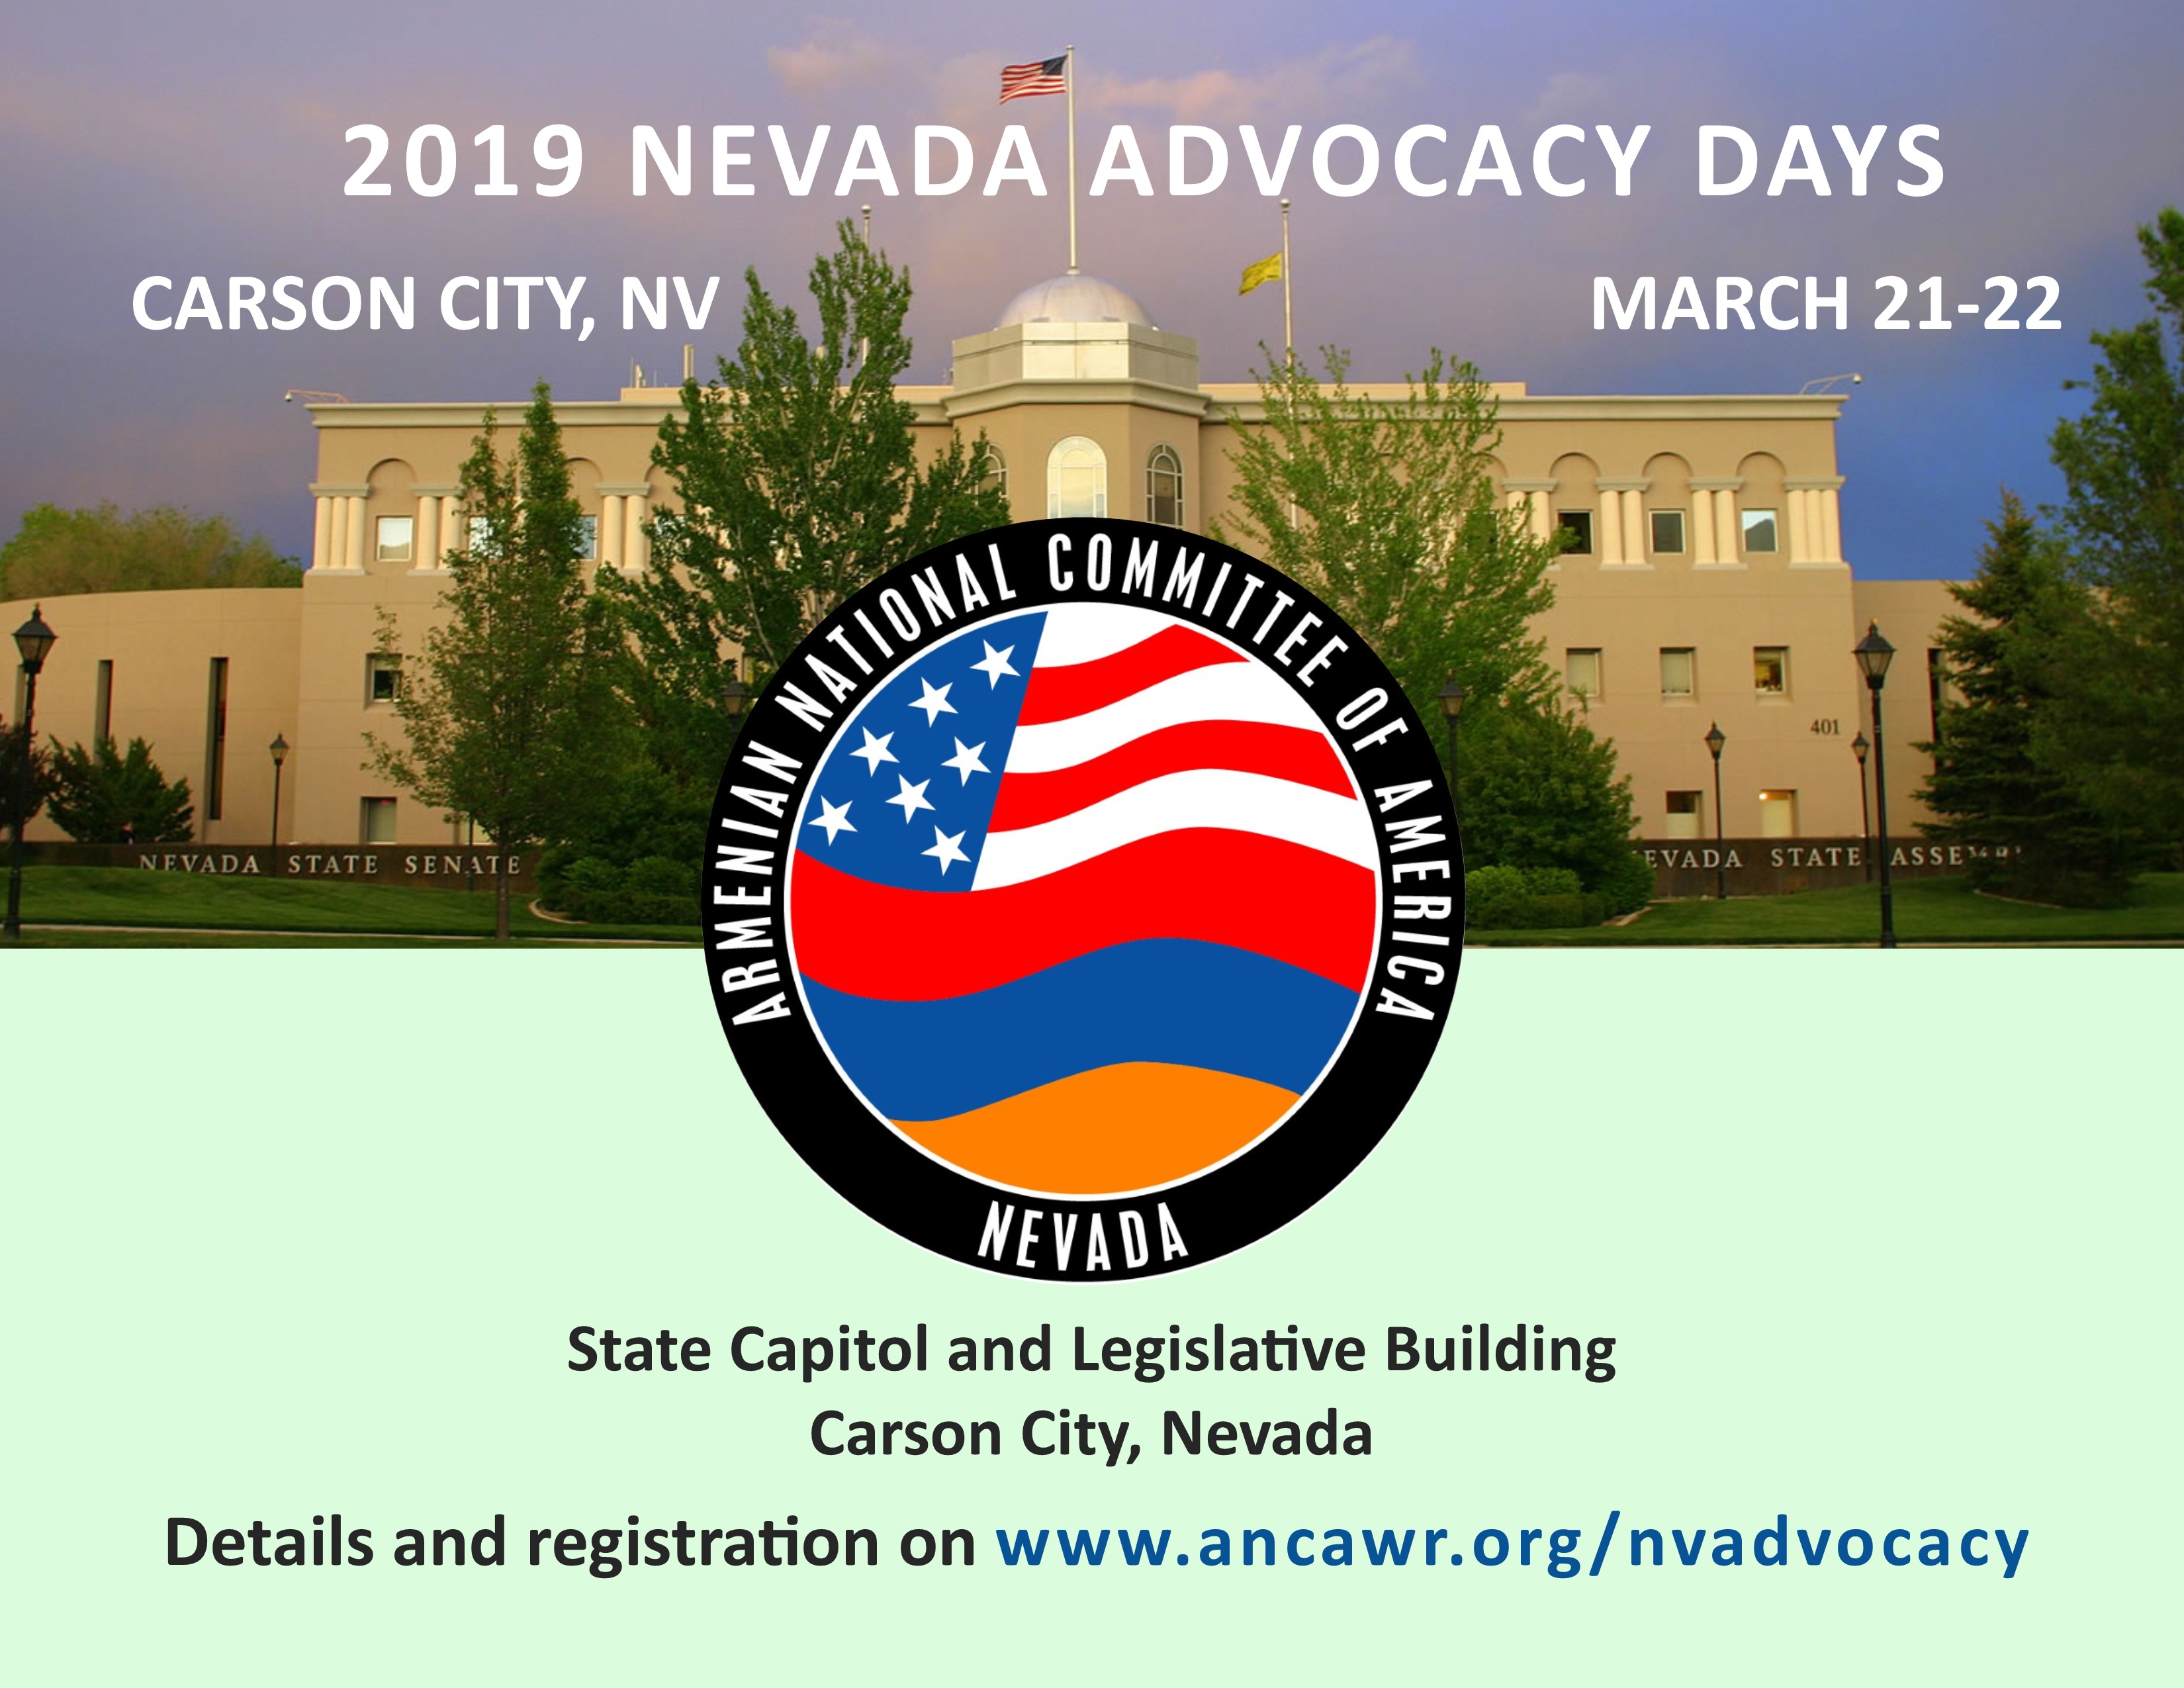 ANCA-WR and ANCA-Nevada Announce March 21-22 Advocacy Days